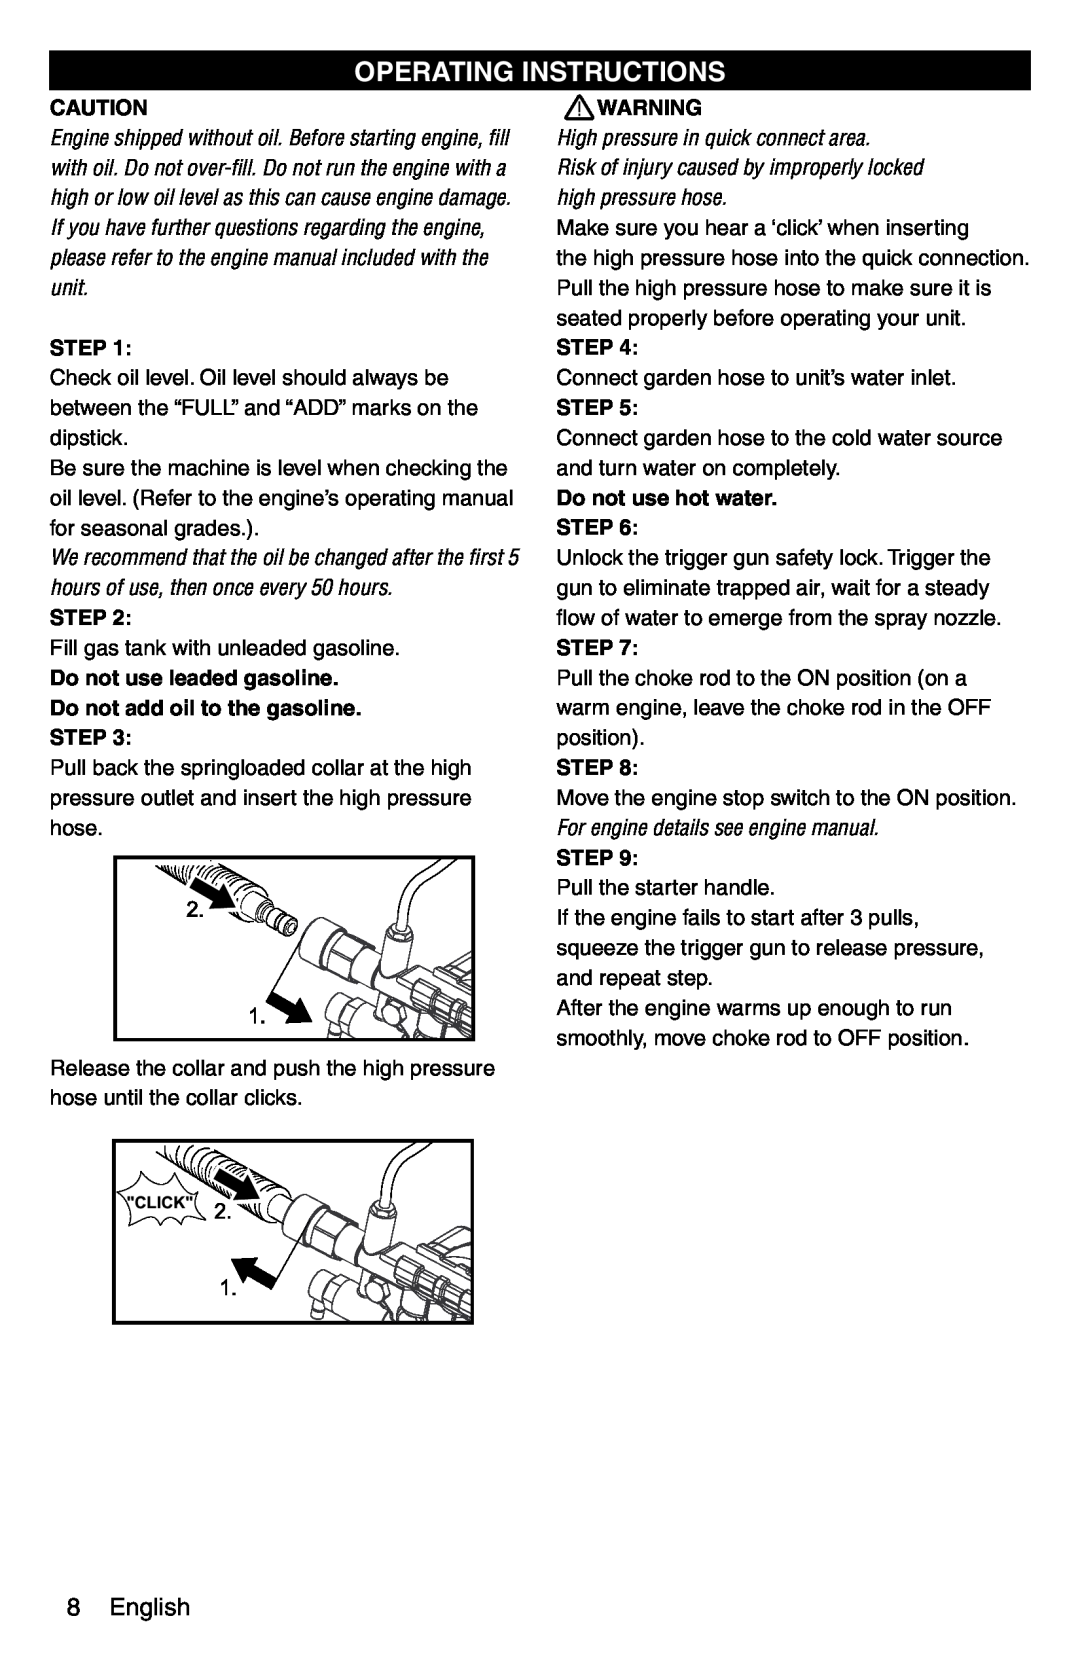 Karcher G 2600 PC Operating Instructions, English, Do not use leaded gasoline Do not add oil to the gasoline STEP, Step 